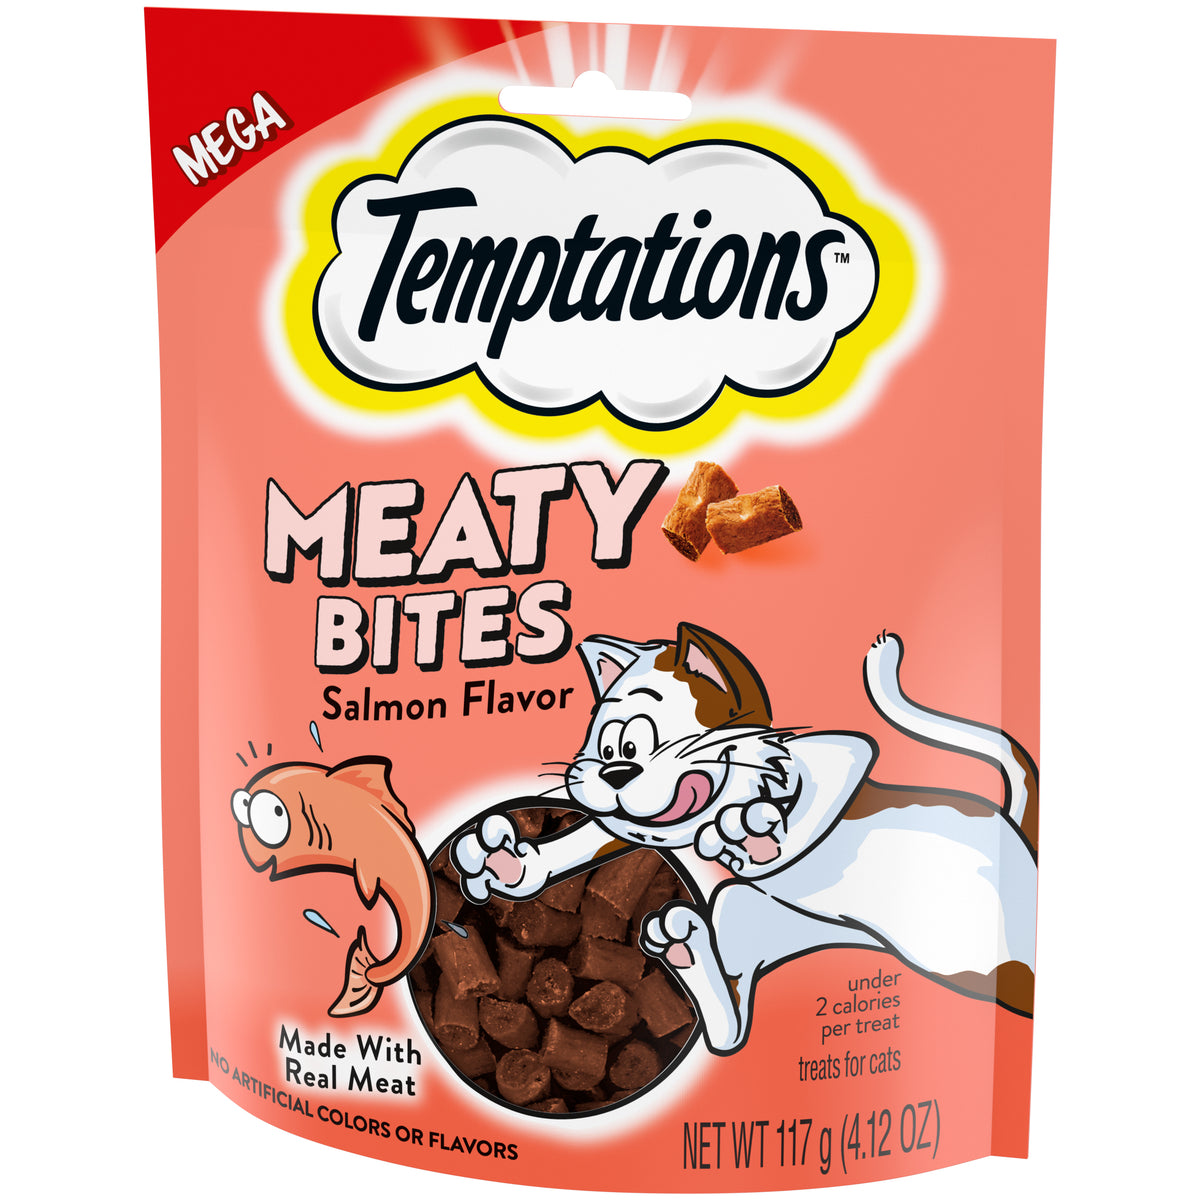 [Temptations][TEMPTATIONS Meaty Bites, Soft and Savory Cat Treats, Salmon Flavor, 4.1 oz. Pouch][Image Center Right (3/4 Angle)]